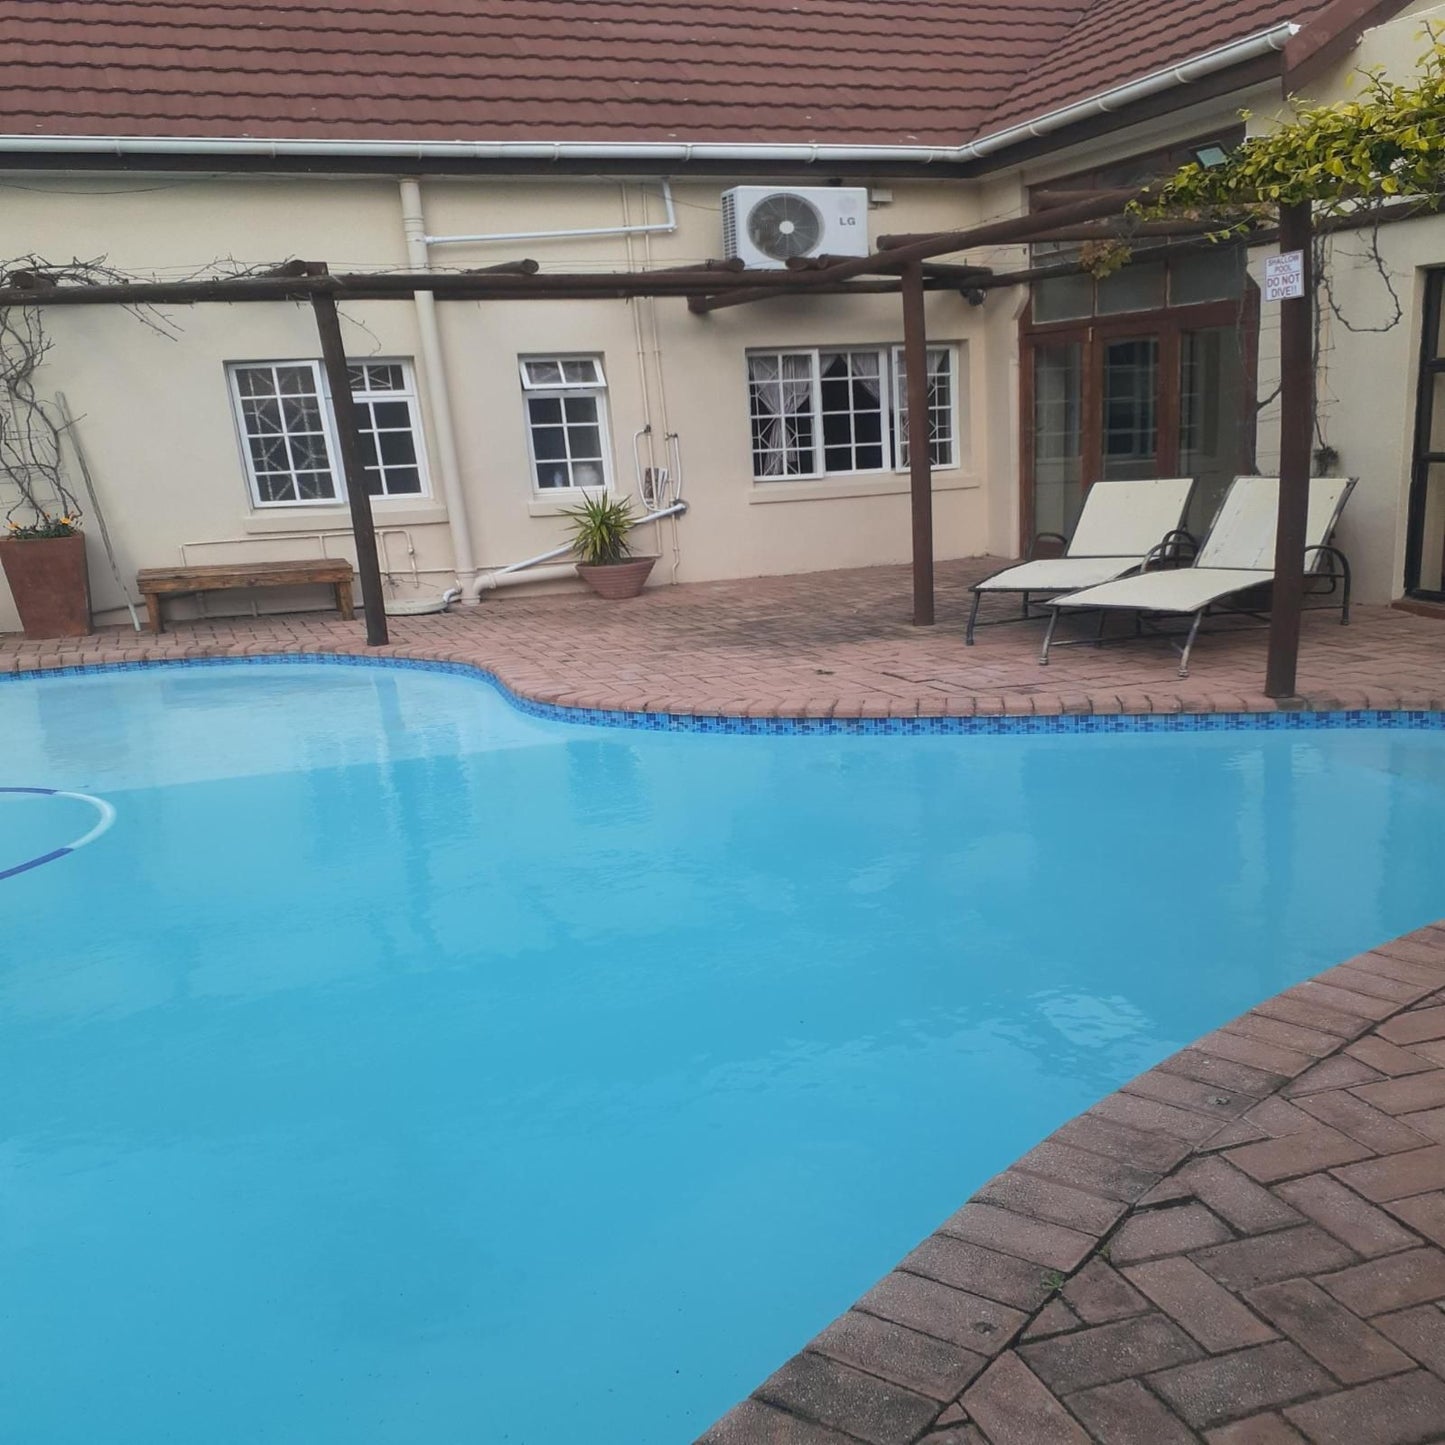 40B Overnight Accommodation Humansdorp Eastern Cape South Africa House, Building, Architecture, Swimming Pool